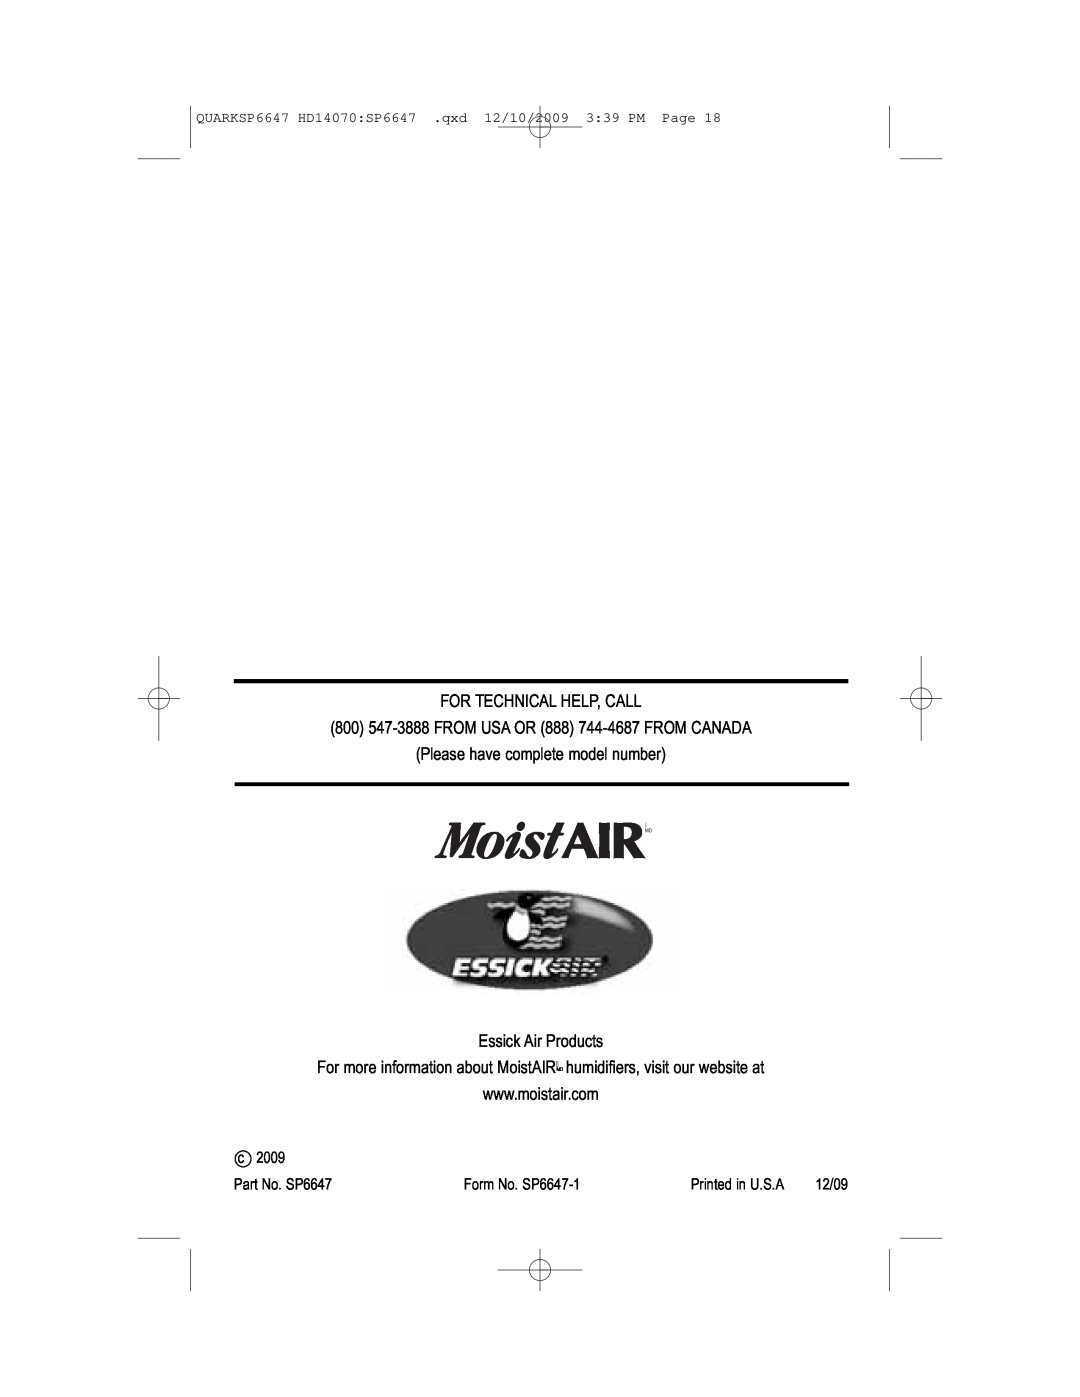 MoistAir HD14070 owner manual For Technical Help, Call, Essick Air Products, Part No. SP6647, Form No. SP6647-1, 12/09 